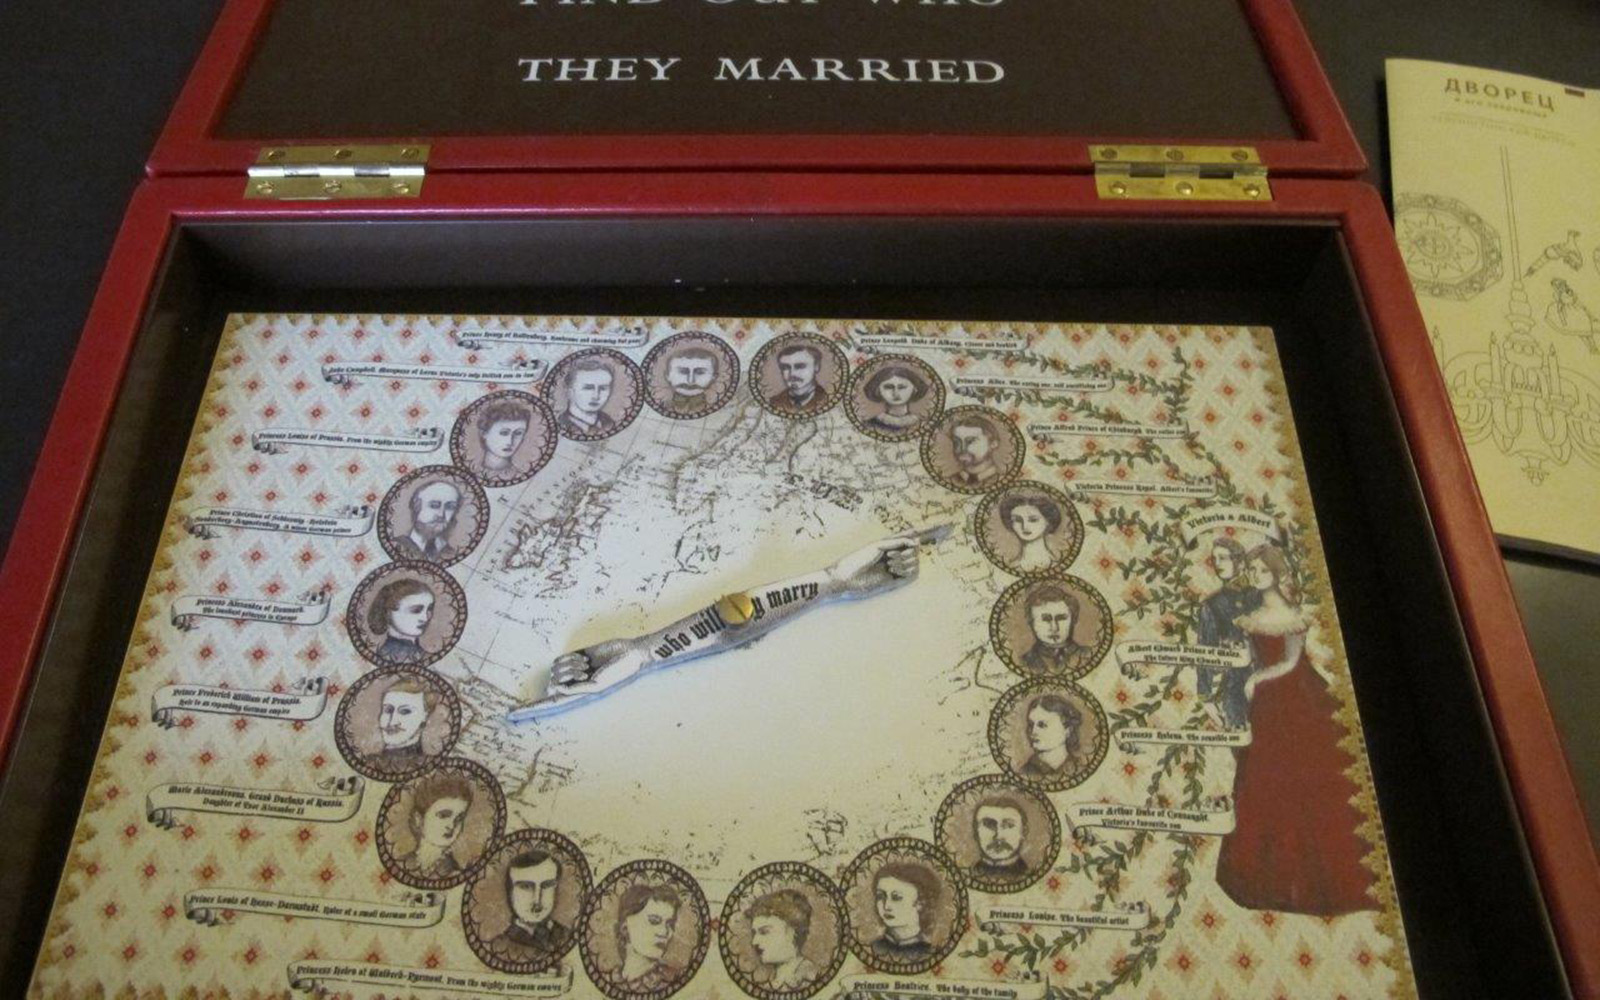 A Game Find Out Who They Married By Olga Karapysh